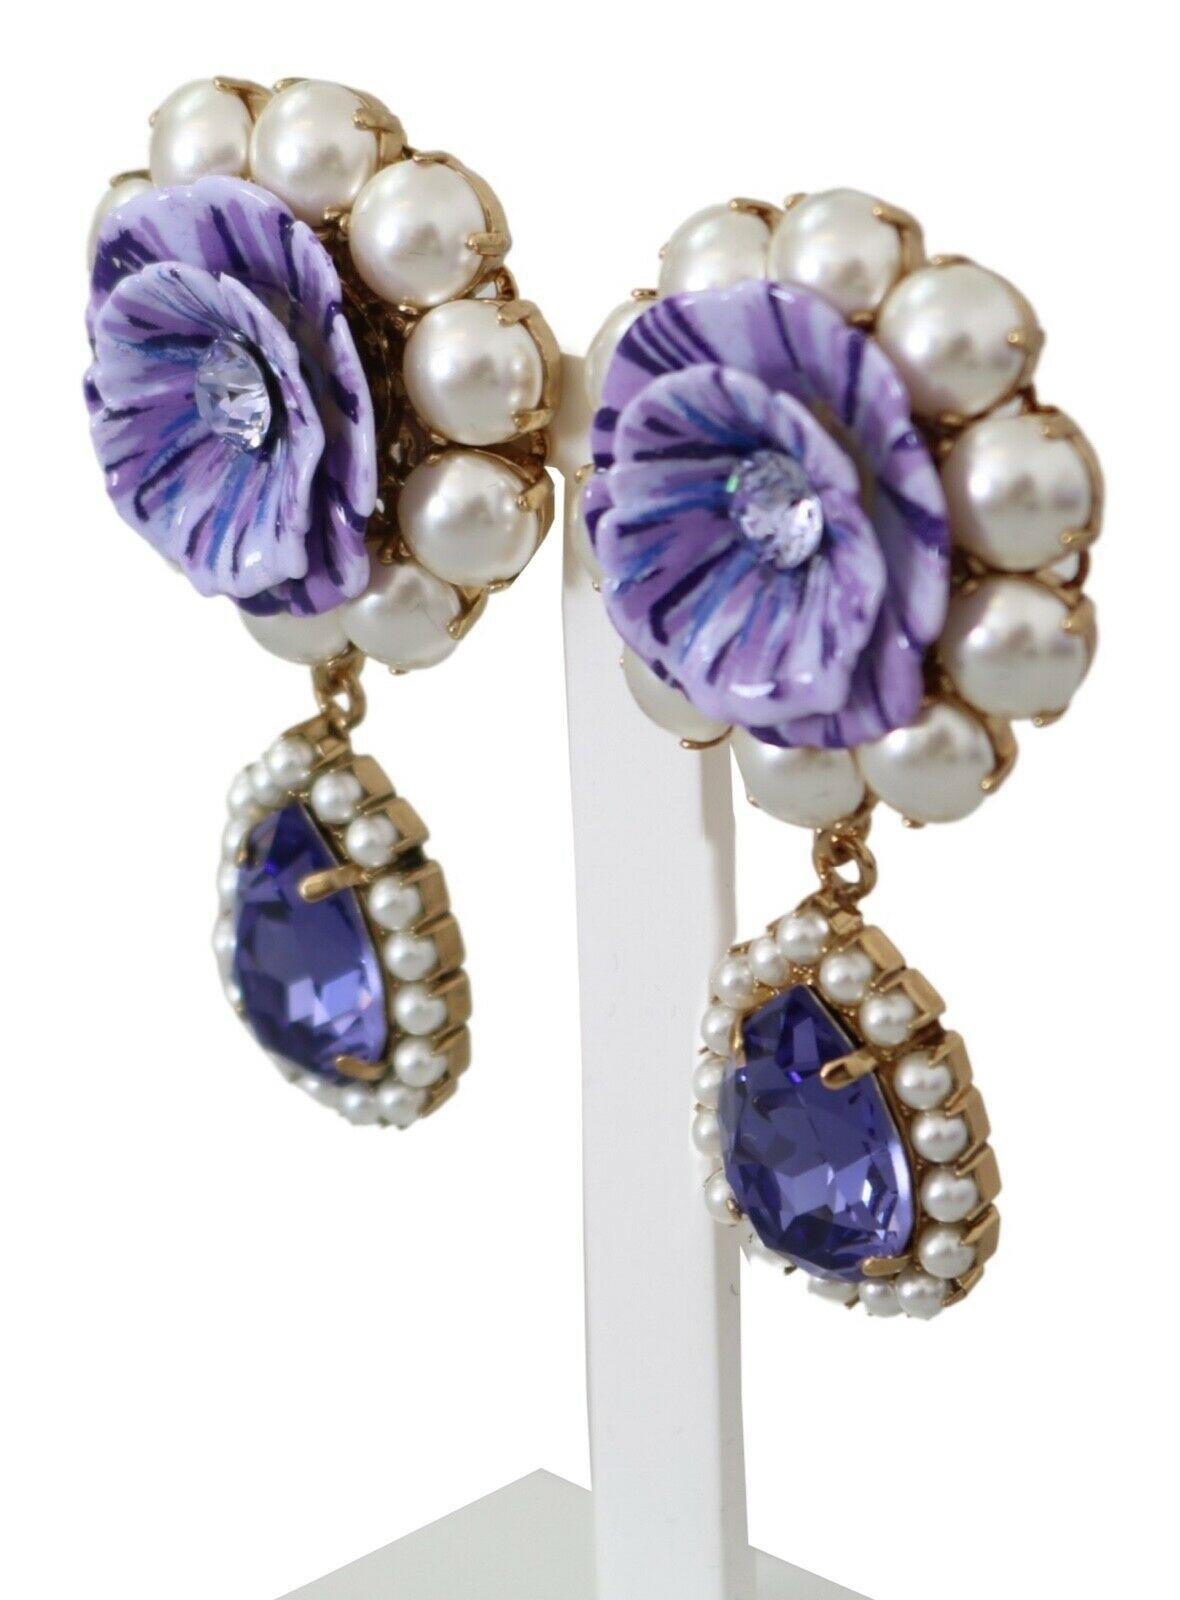  Gorgeous brand new with tags, 100% Authentic Dolce & Gabbana Clip-on earrings. Emblazoned with floral appliques. Inlaid with purple and white crystals.




Model: Clip-on, drop
Motive: Floral
Material: Brass, crystals, resin

Color: Gold

Crystal: